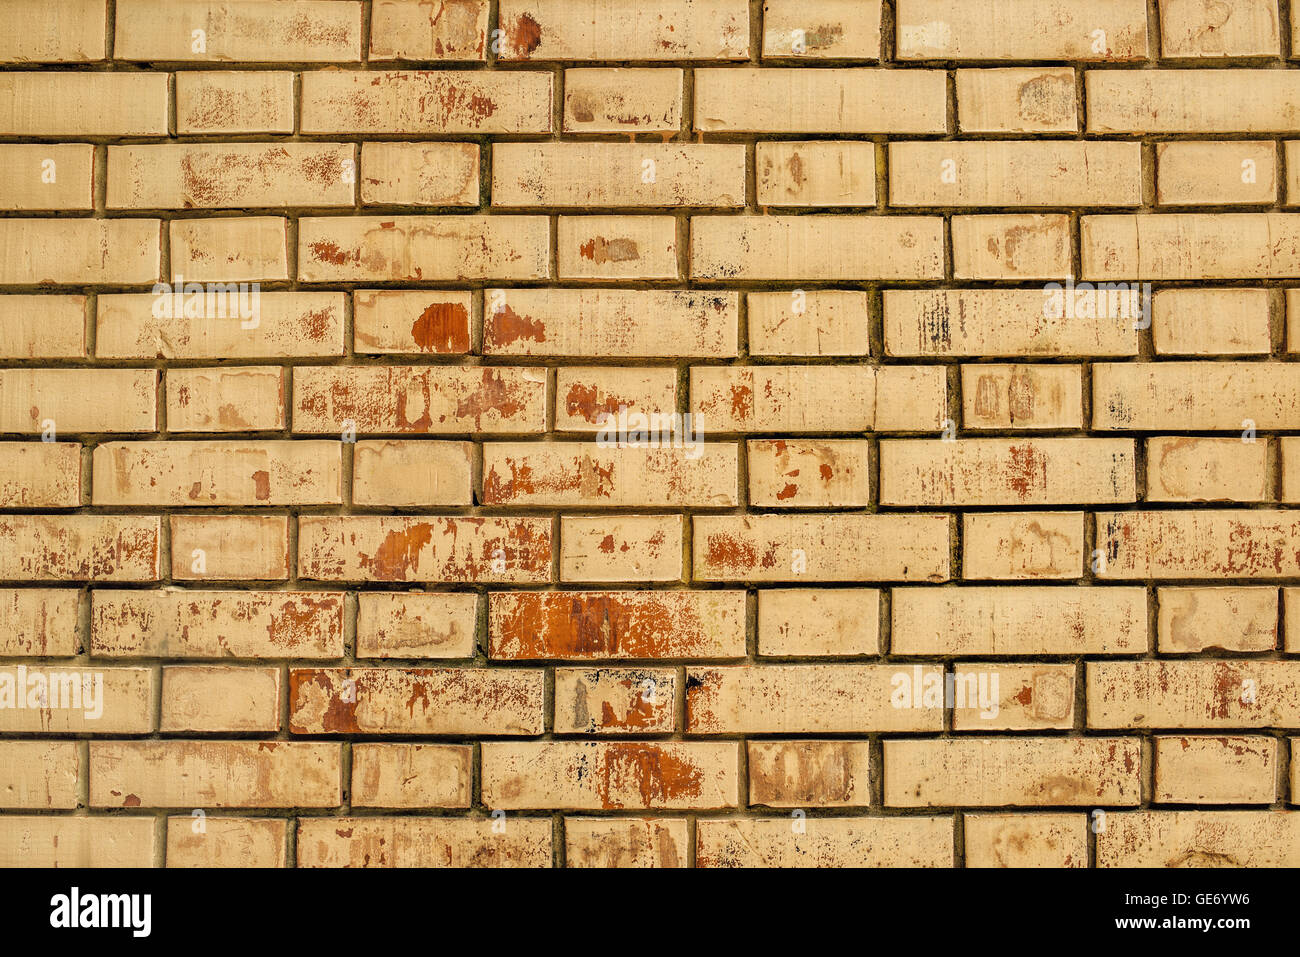 Weathered brick wall texture, urban decay background Stock Photo